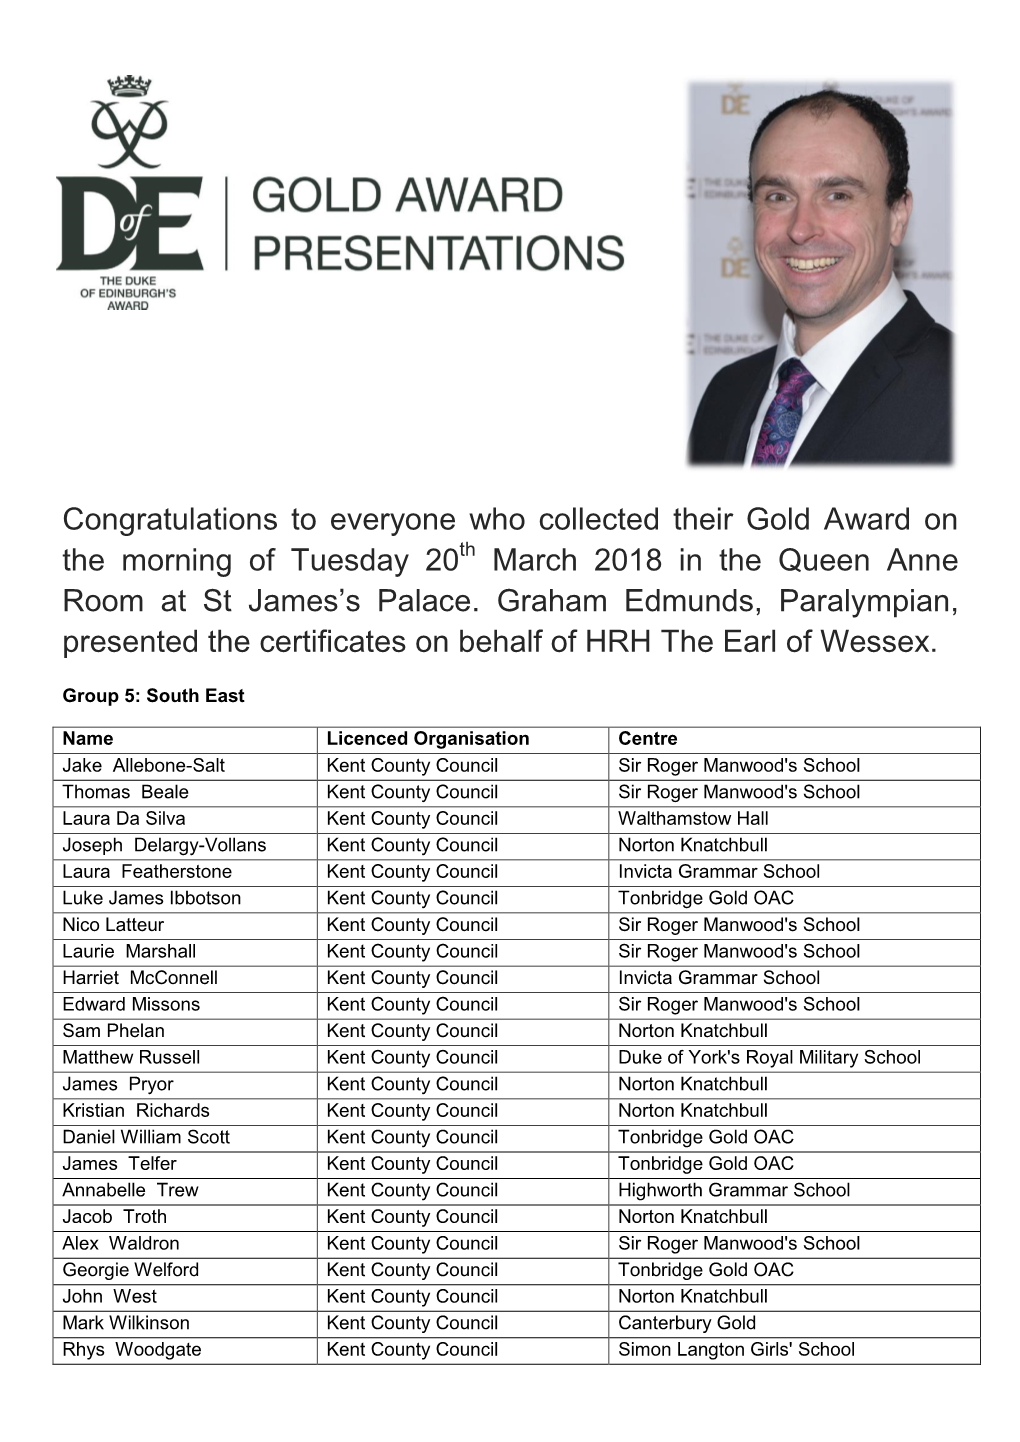 Congratulations to Everyone Who Collected Their Gold Award on the Morning of Tuesday 20 March 2018 in the Queen Anne Room at St